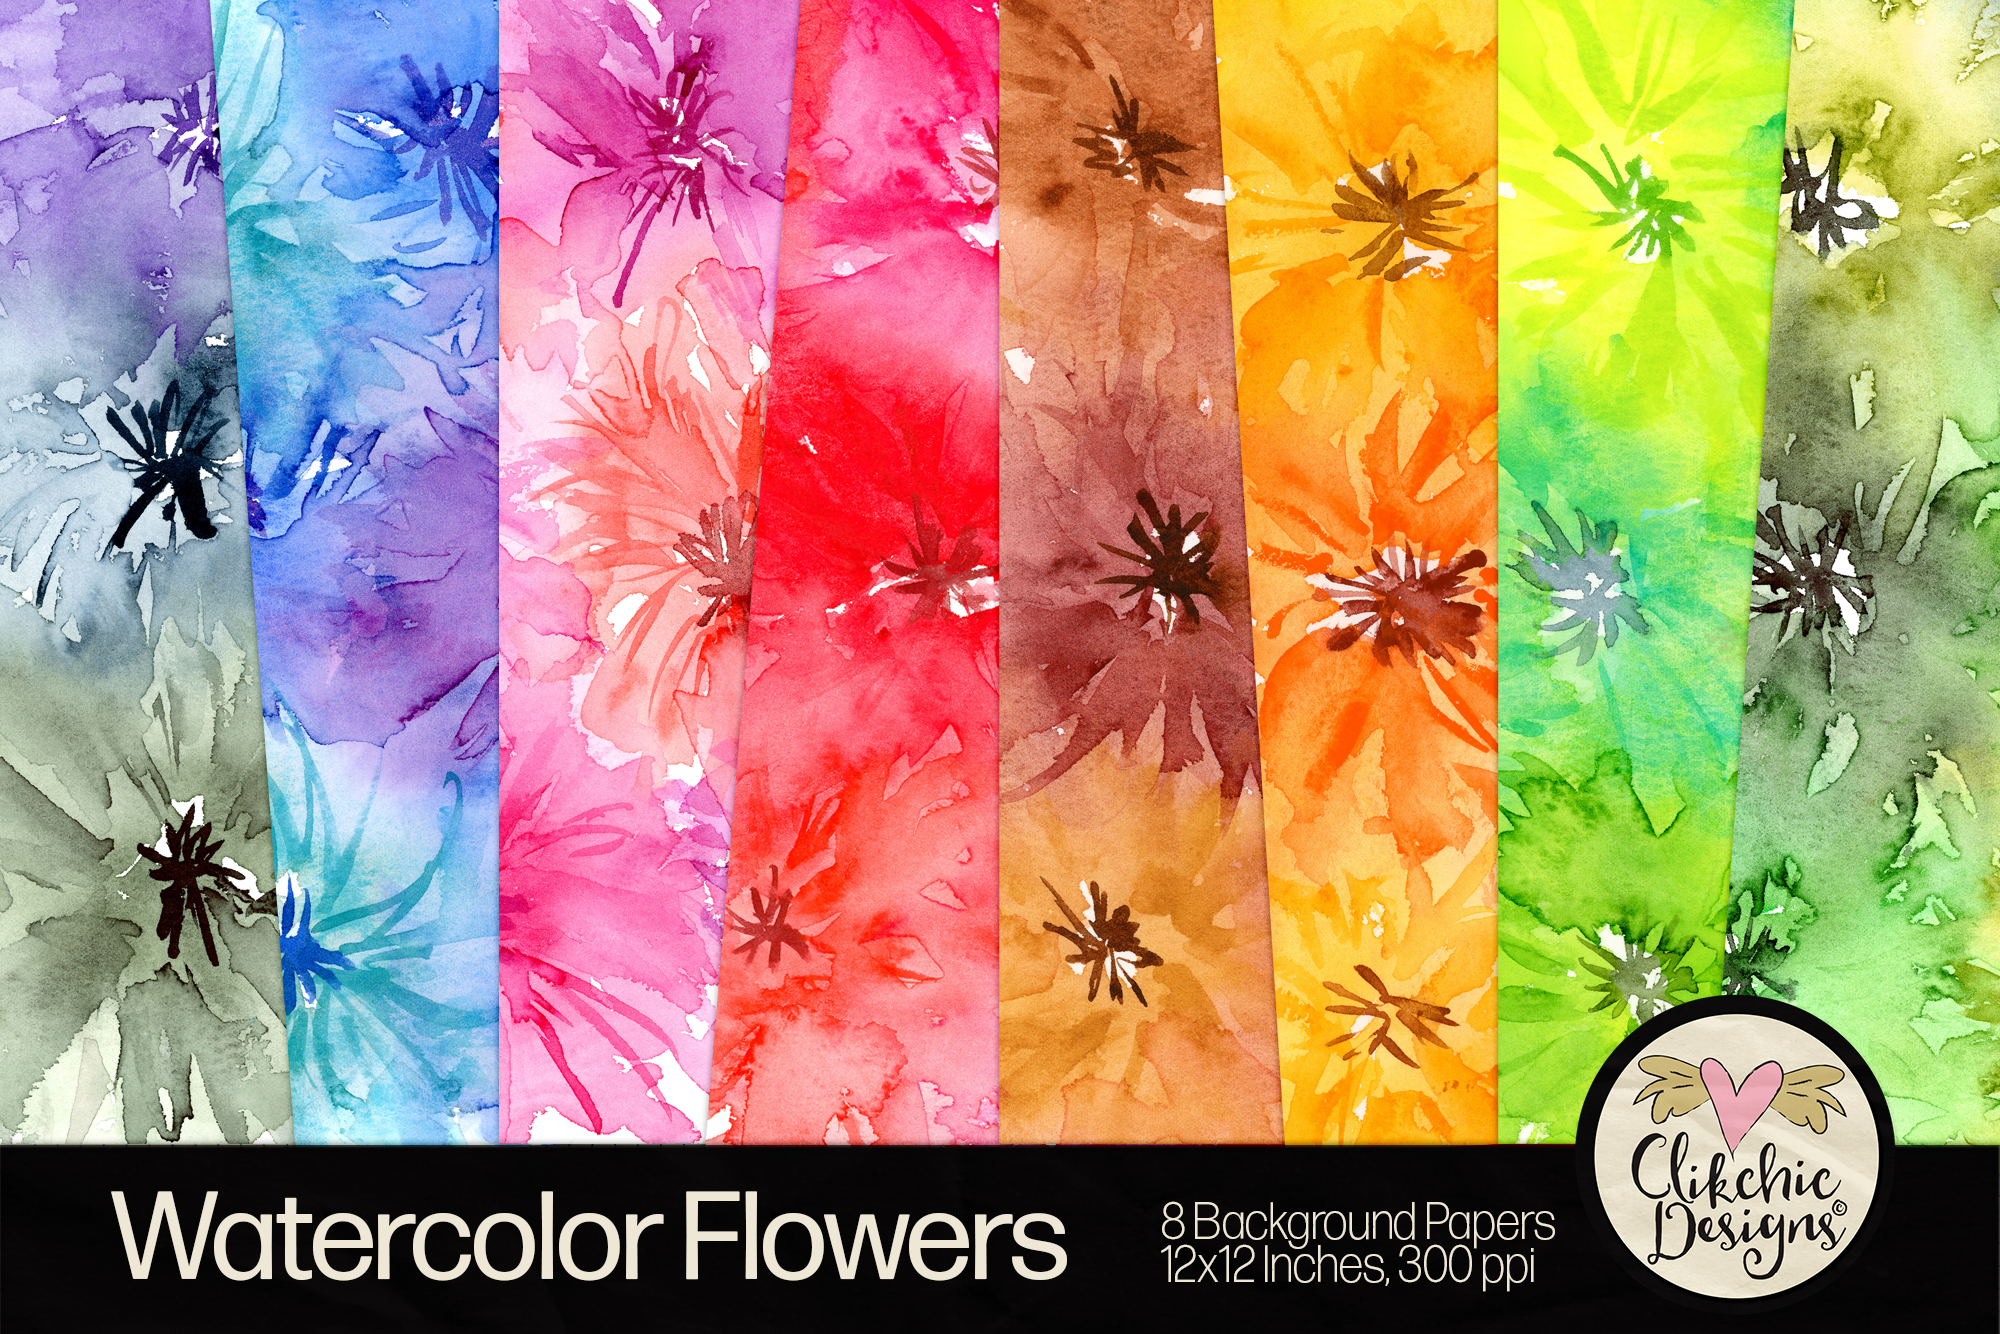 Dreamy Watercolor Flowers Background Paper